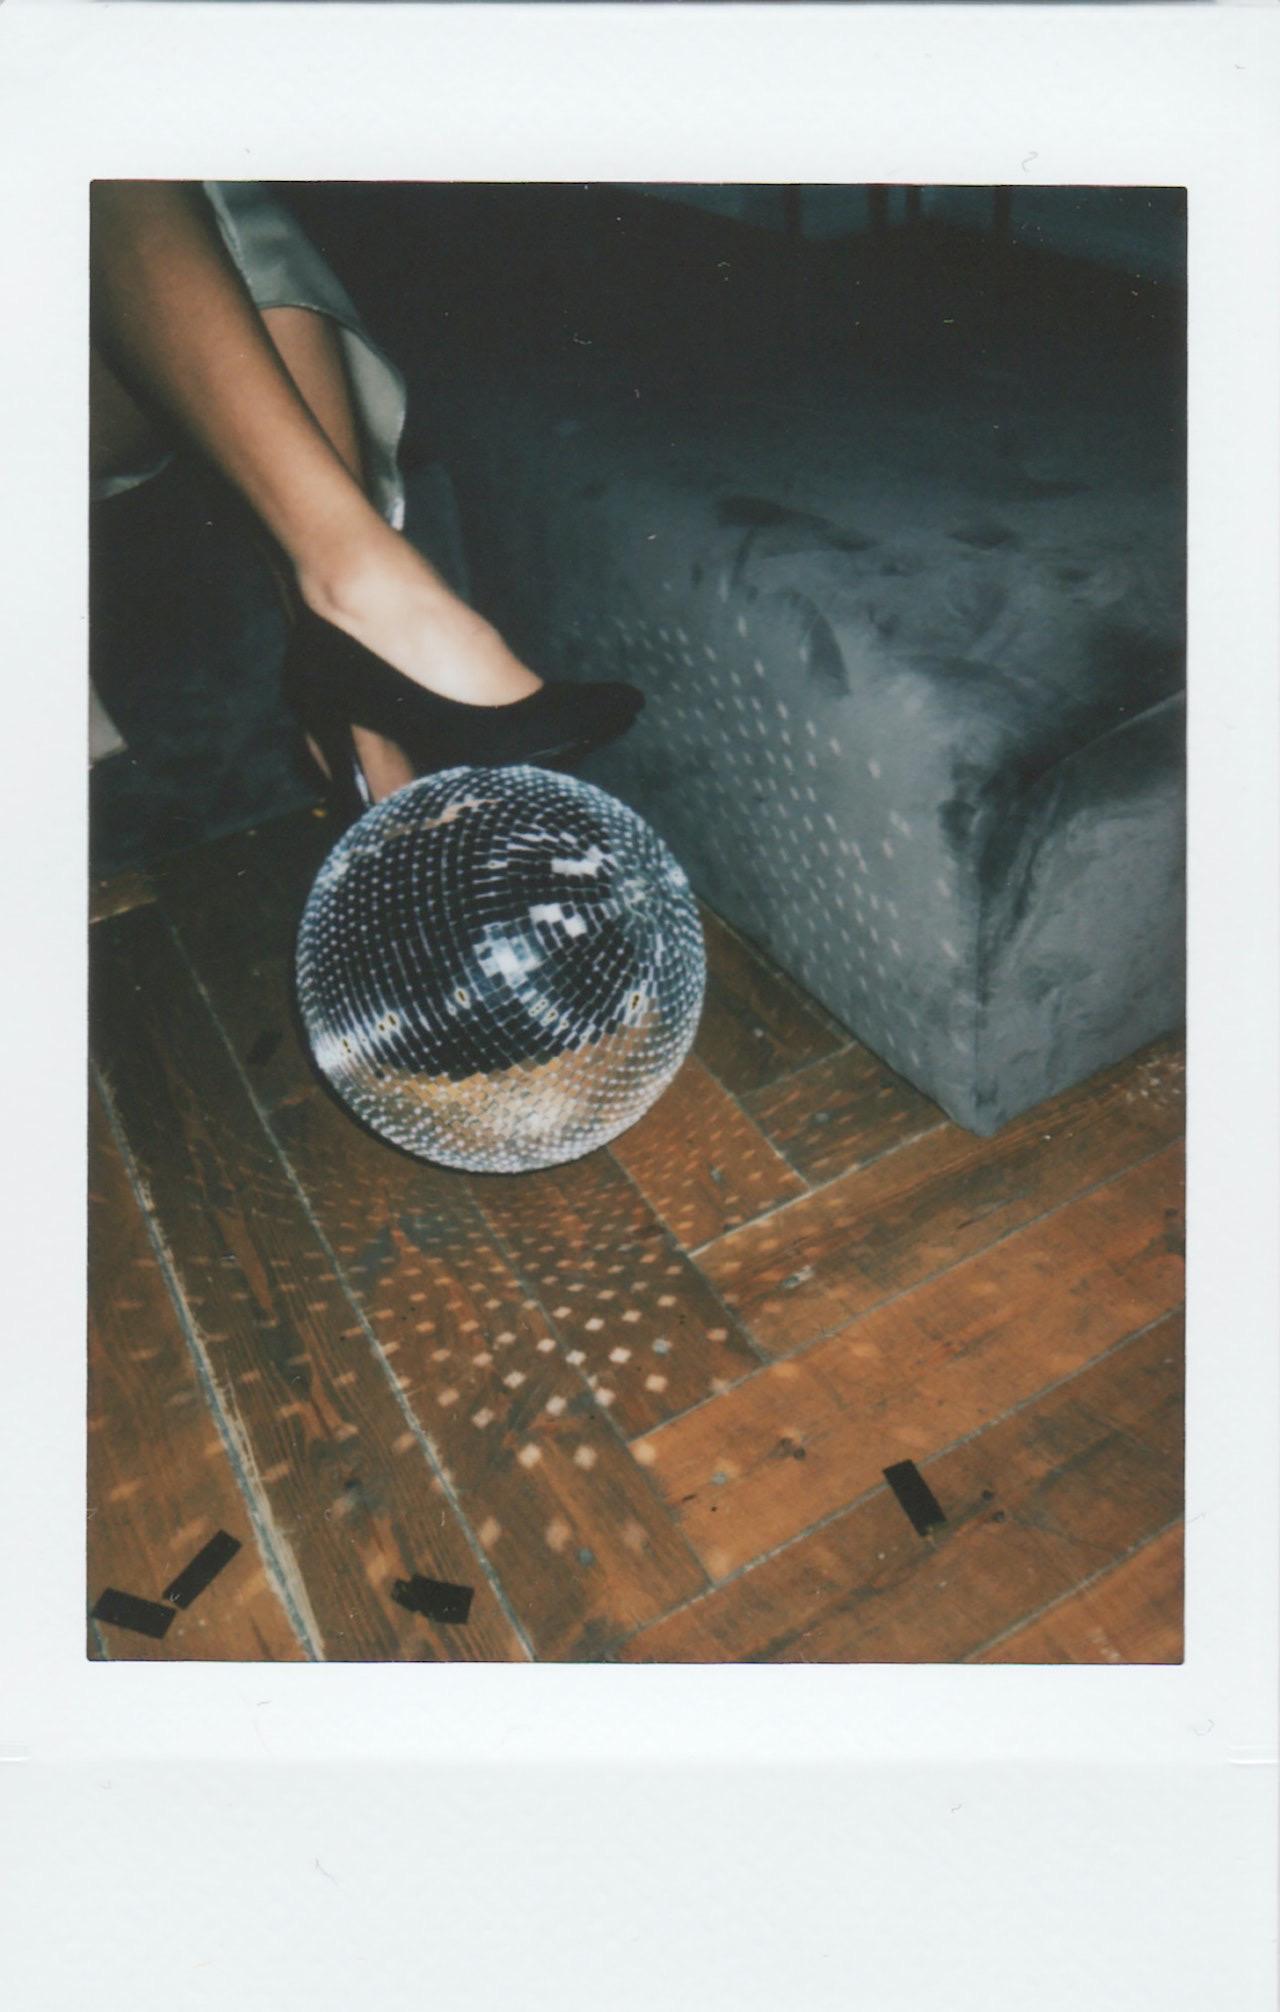 disco ball with foot